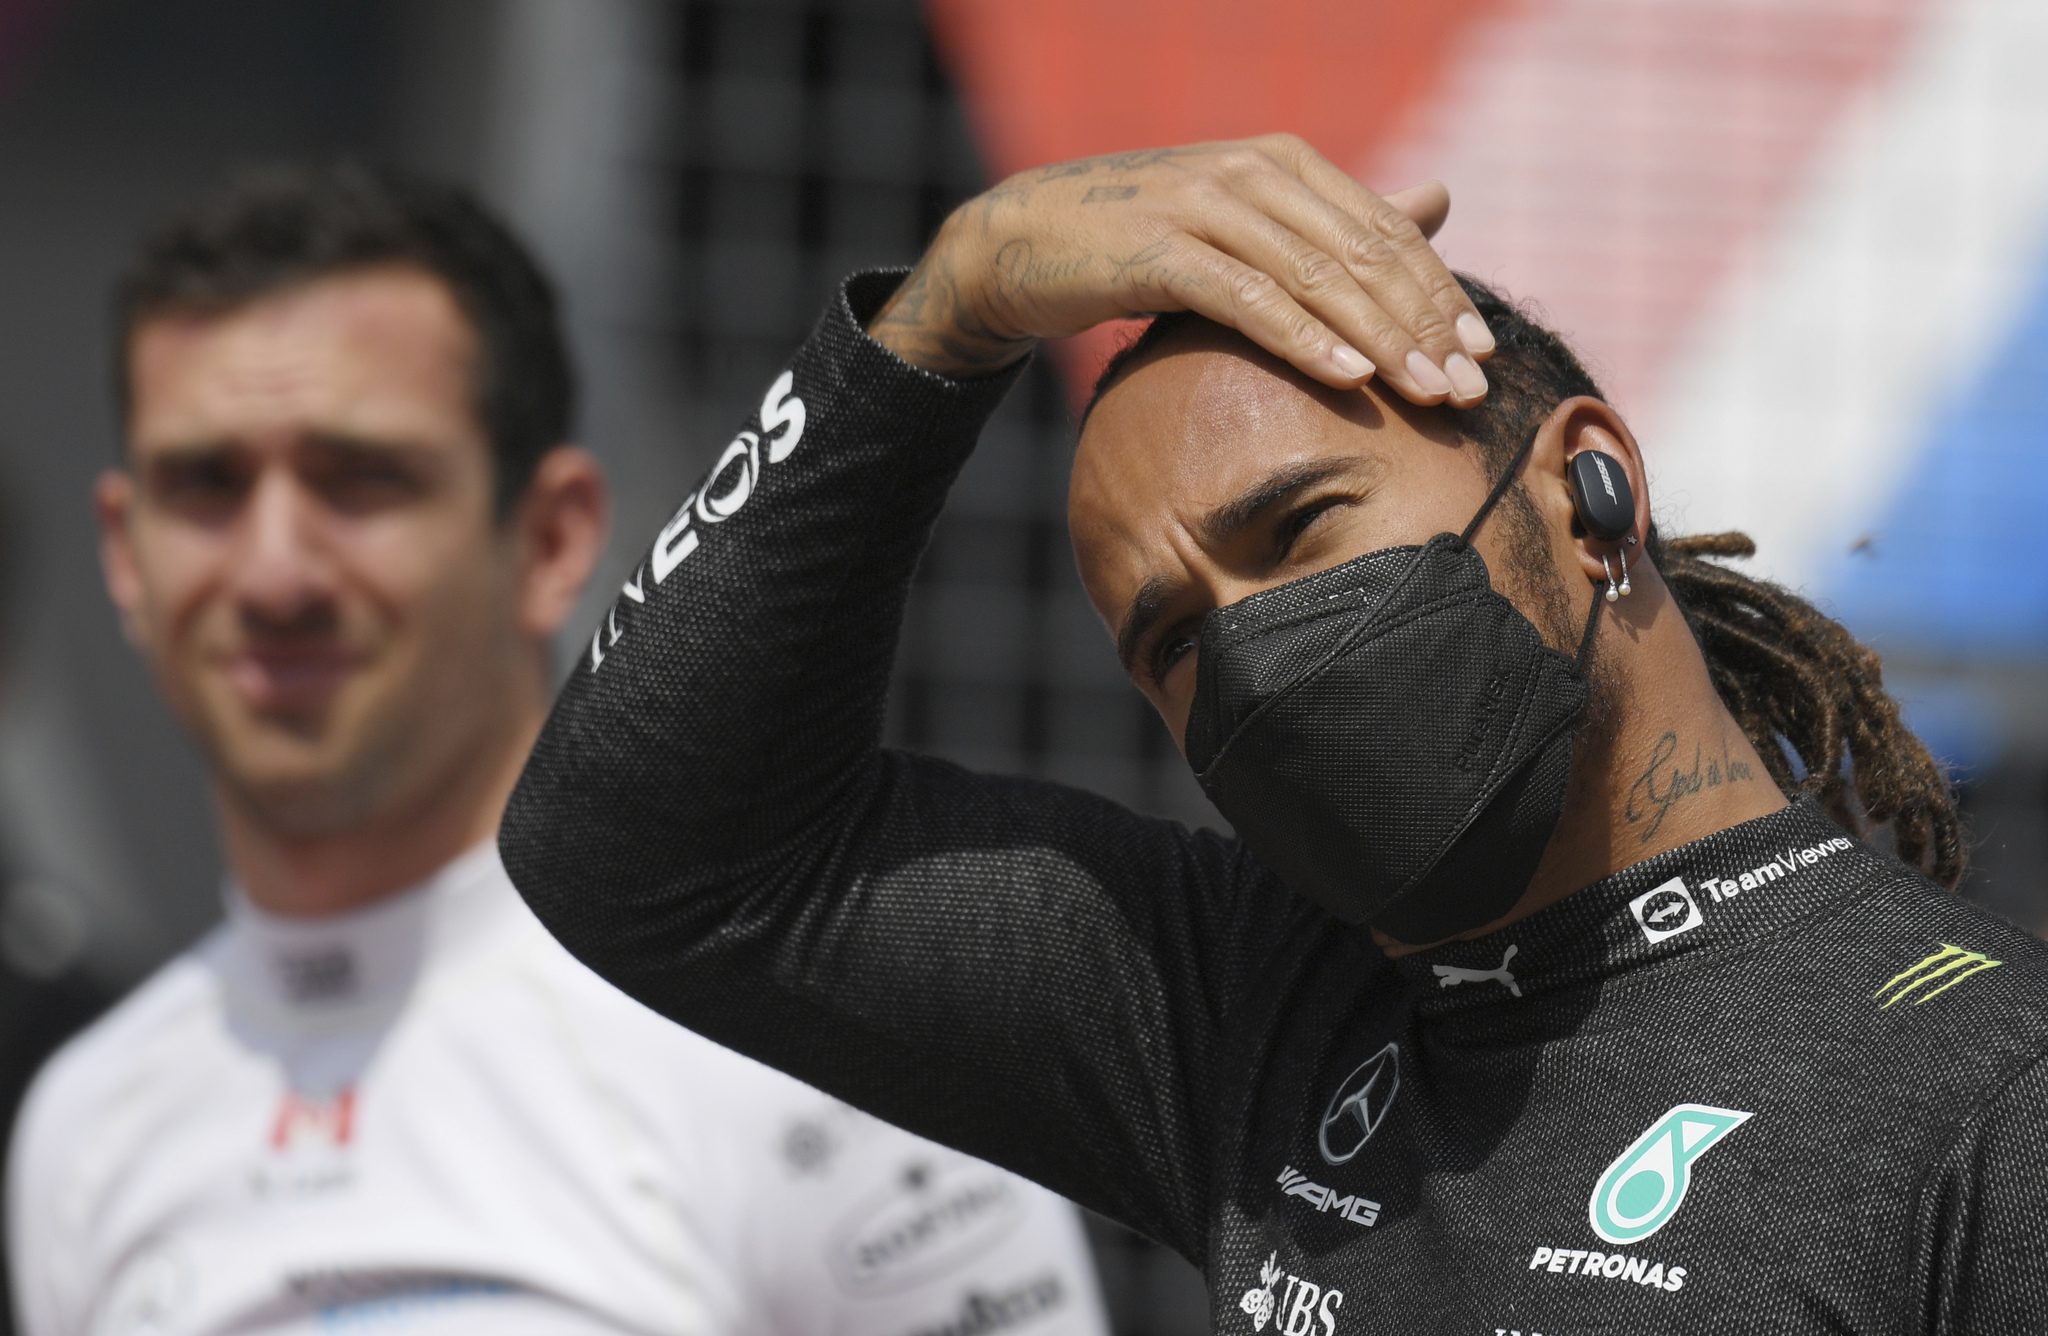 Mercedes driver lt;HIT gt;Lewis lt;/HIT gt; lt;HIT gt;Hamilton lt;/HIT gt; of Britain, right, during the Austrian Formula One Grand Prix at the Red Bull Ring racetrack in Spielberg, Austria, Sunday, July 4, 2021. (Christian Bruna/Pool Photo via AP)